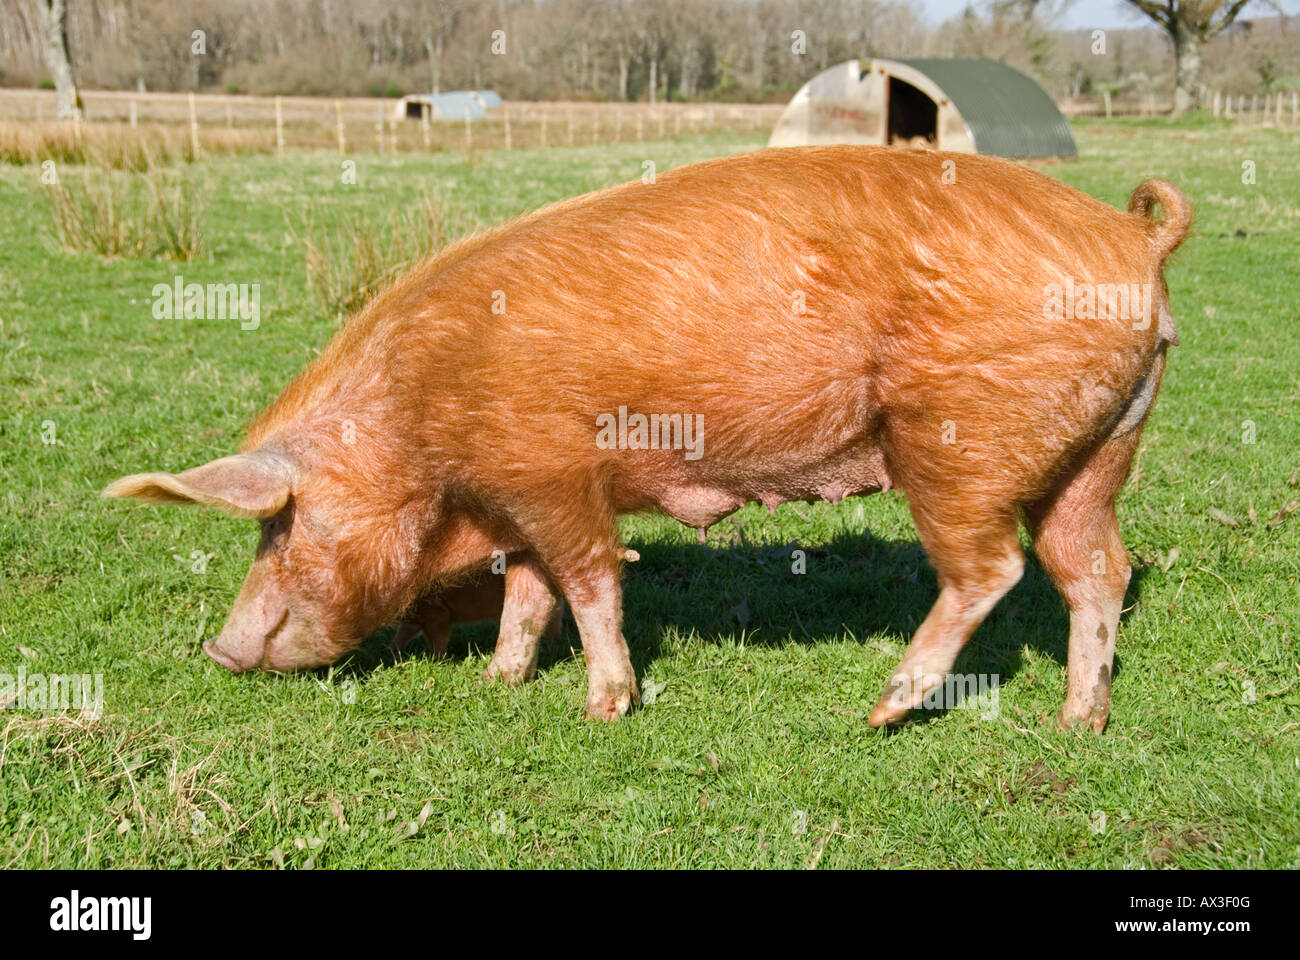 Stock photo of a Tamworth rare breed pig grazing in her field Stock Photo